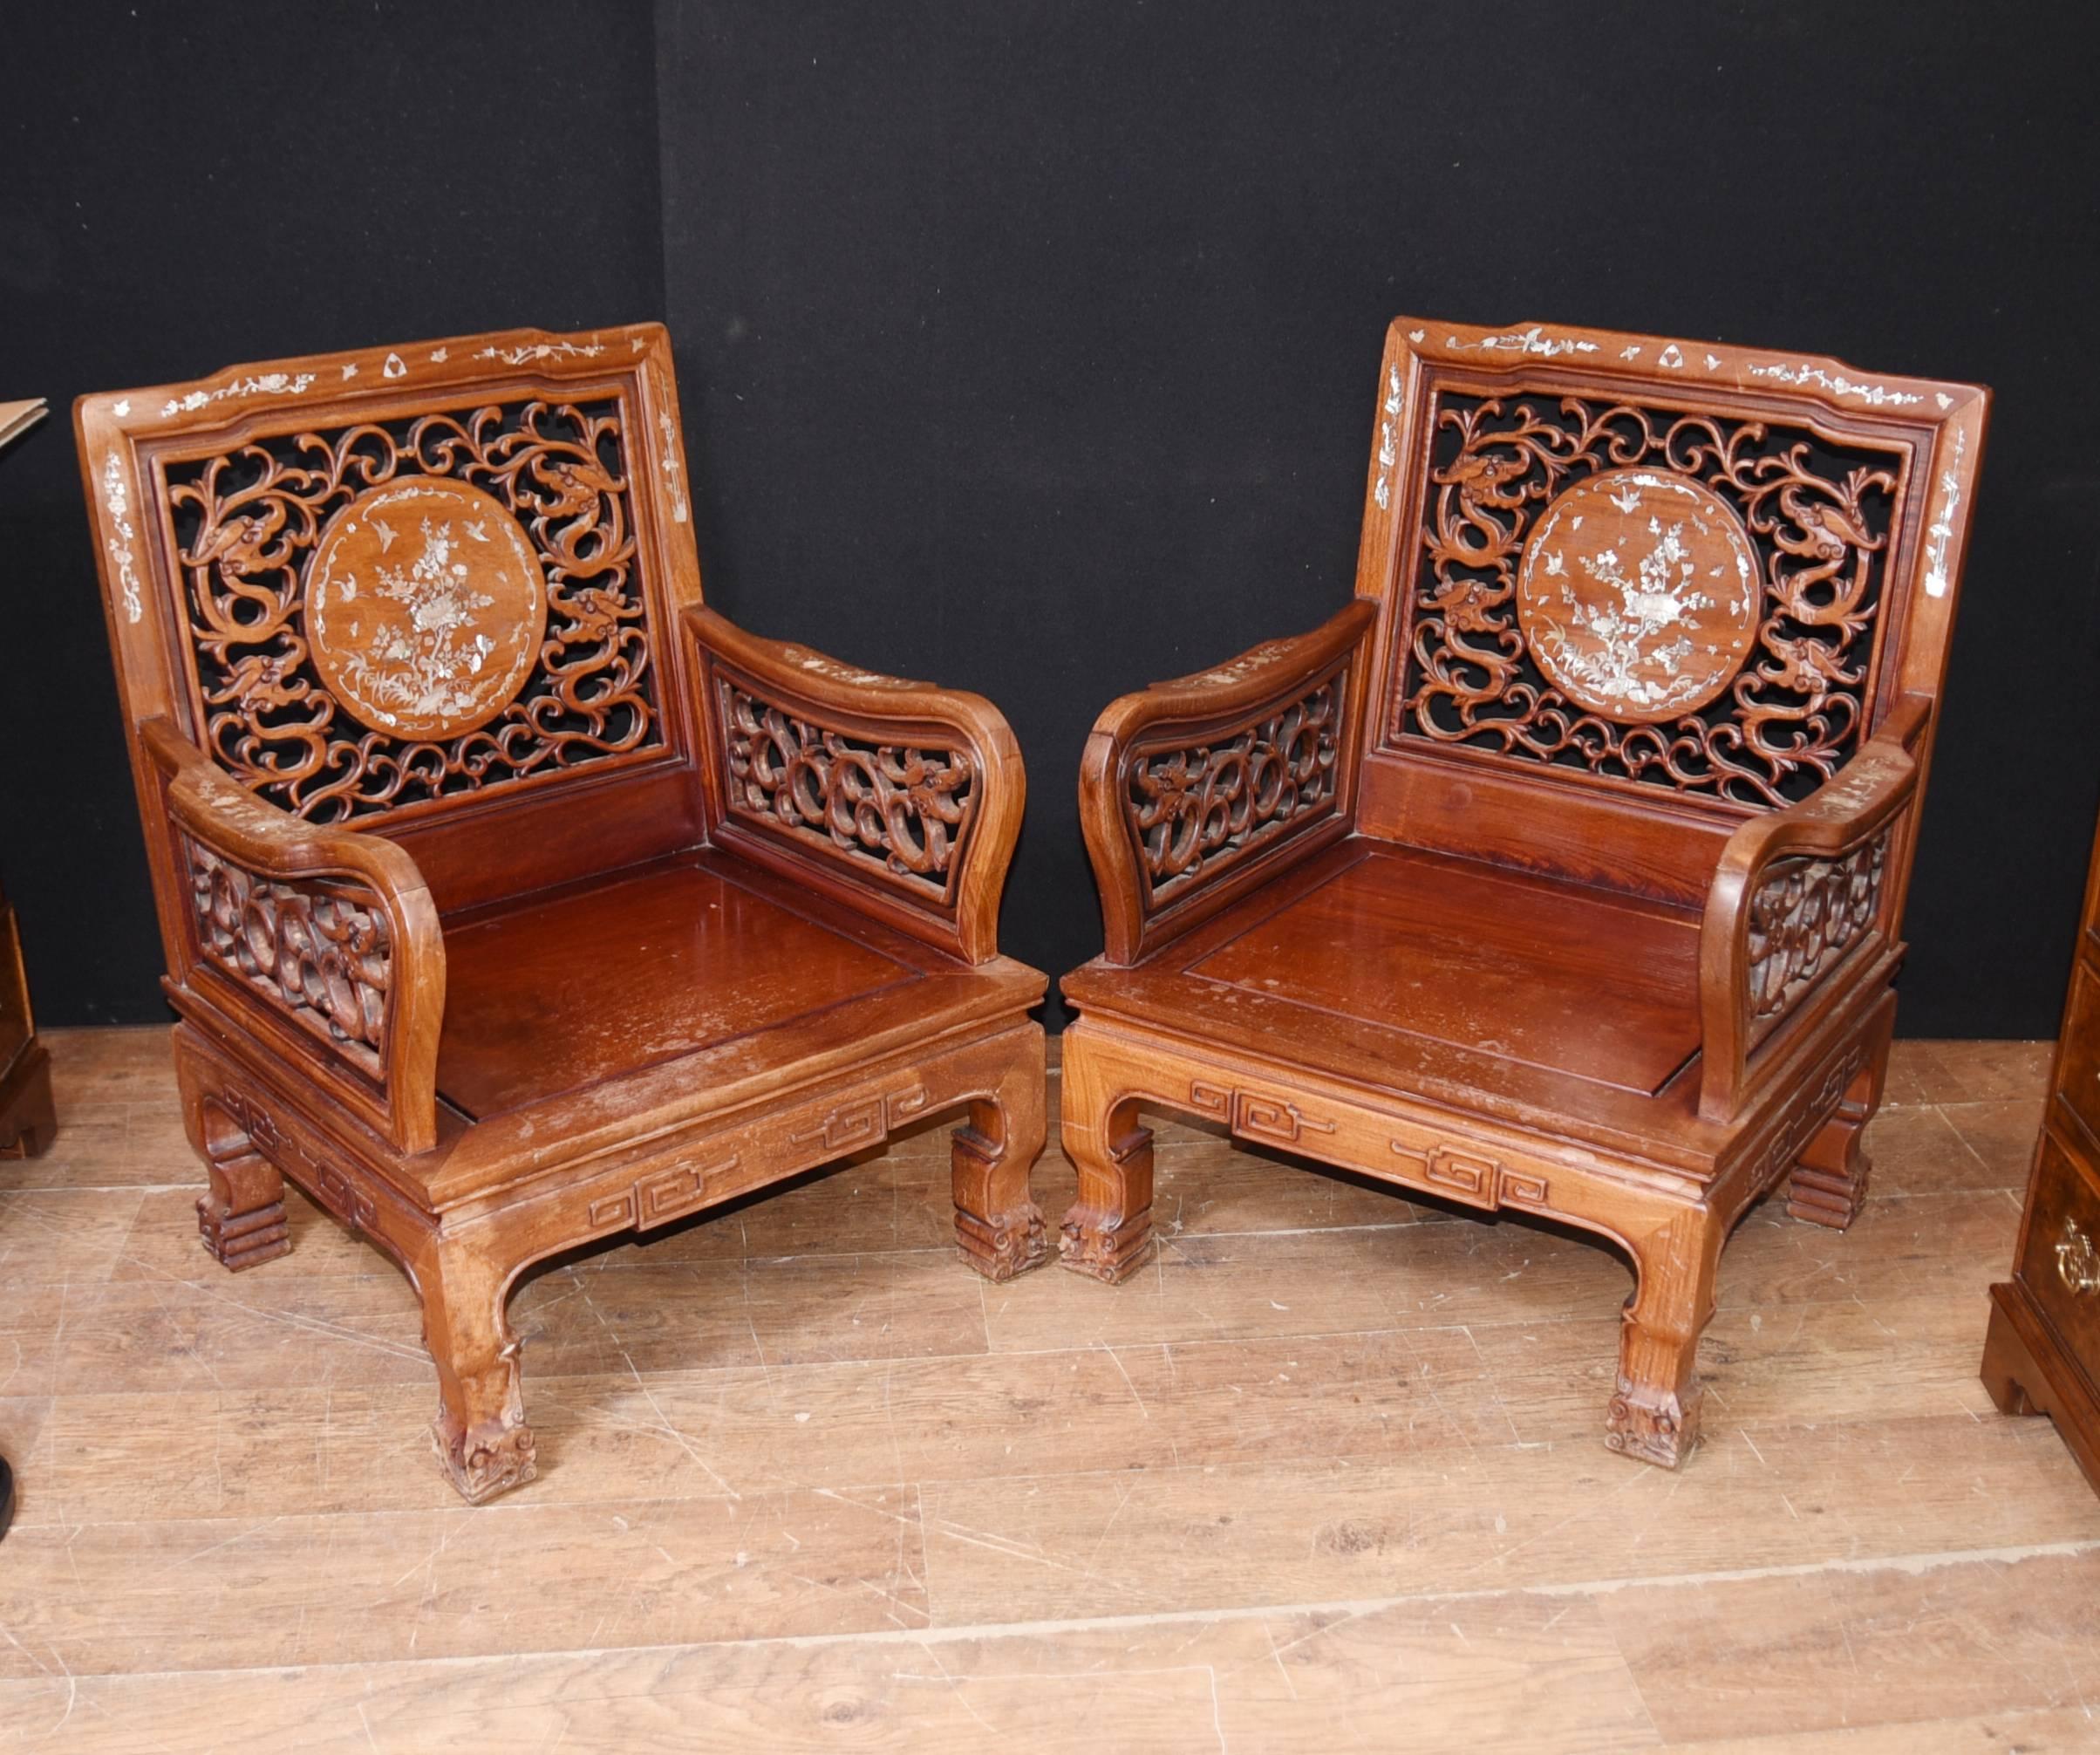 Gorgeous pair of Chinese hardwood antique arm chairs 
Feature intricate mother-of-pearl inlay to back and arms, very detailed
Intricately carved details very well executed
Great interiors pair, would look good with the right sort of cushion
We